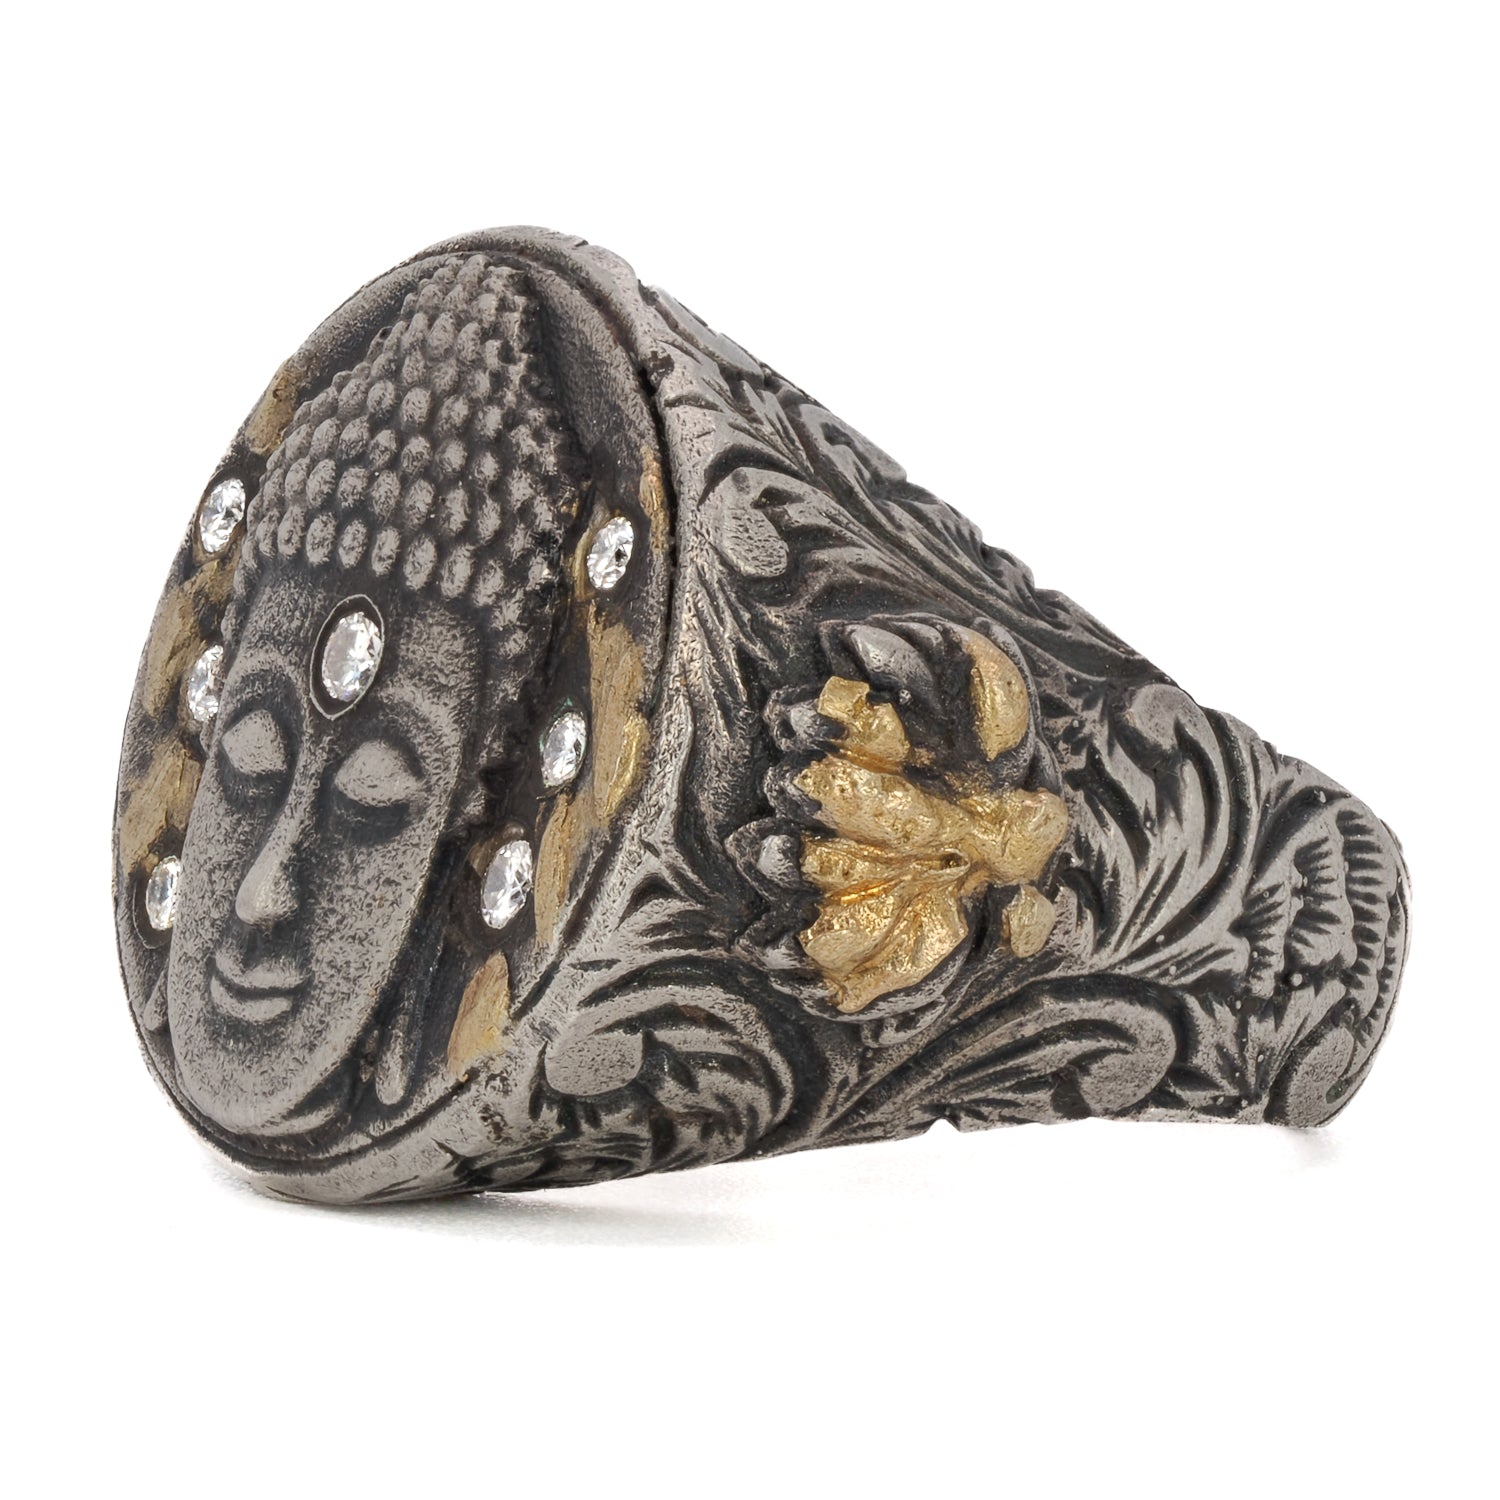 Timeless Beauty - Handmade Buddha Ring with Gold and Diamonds.